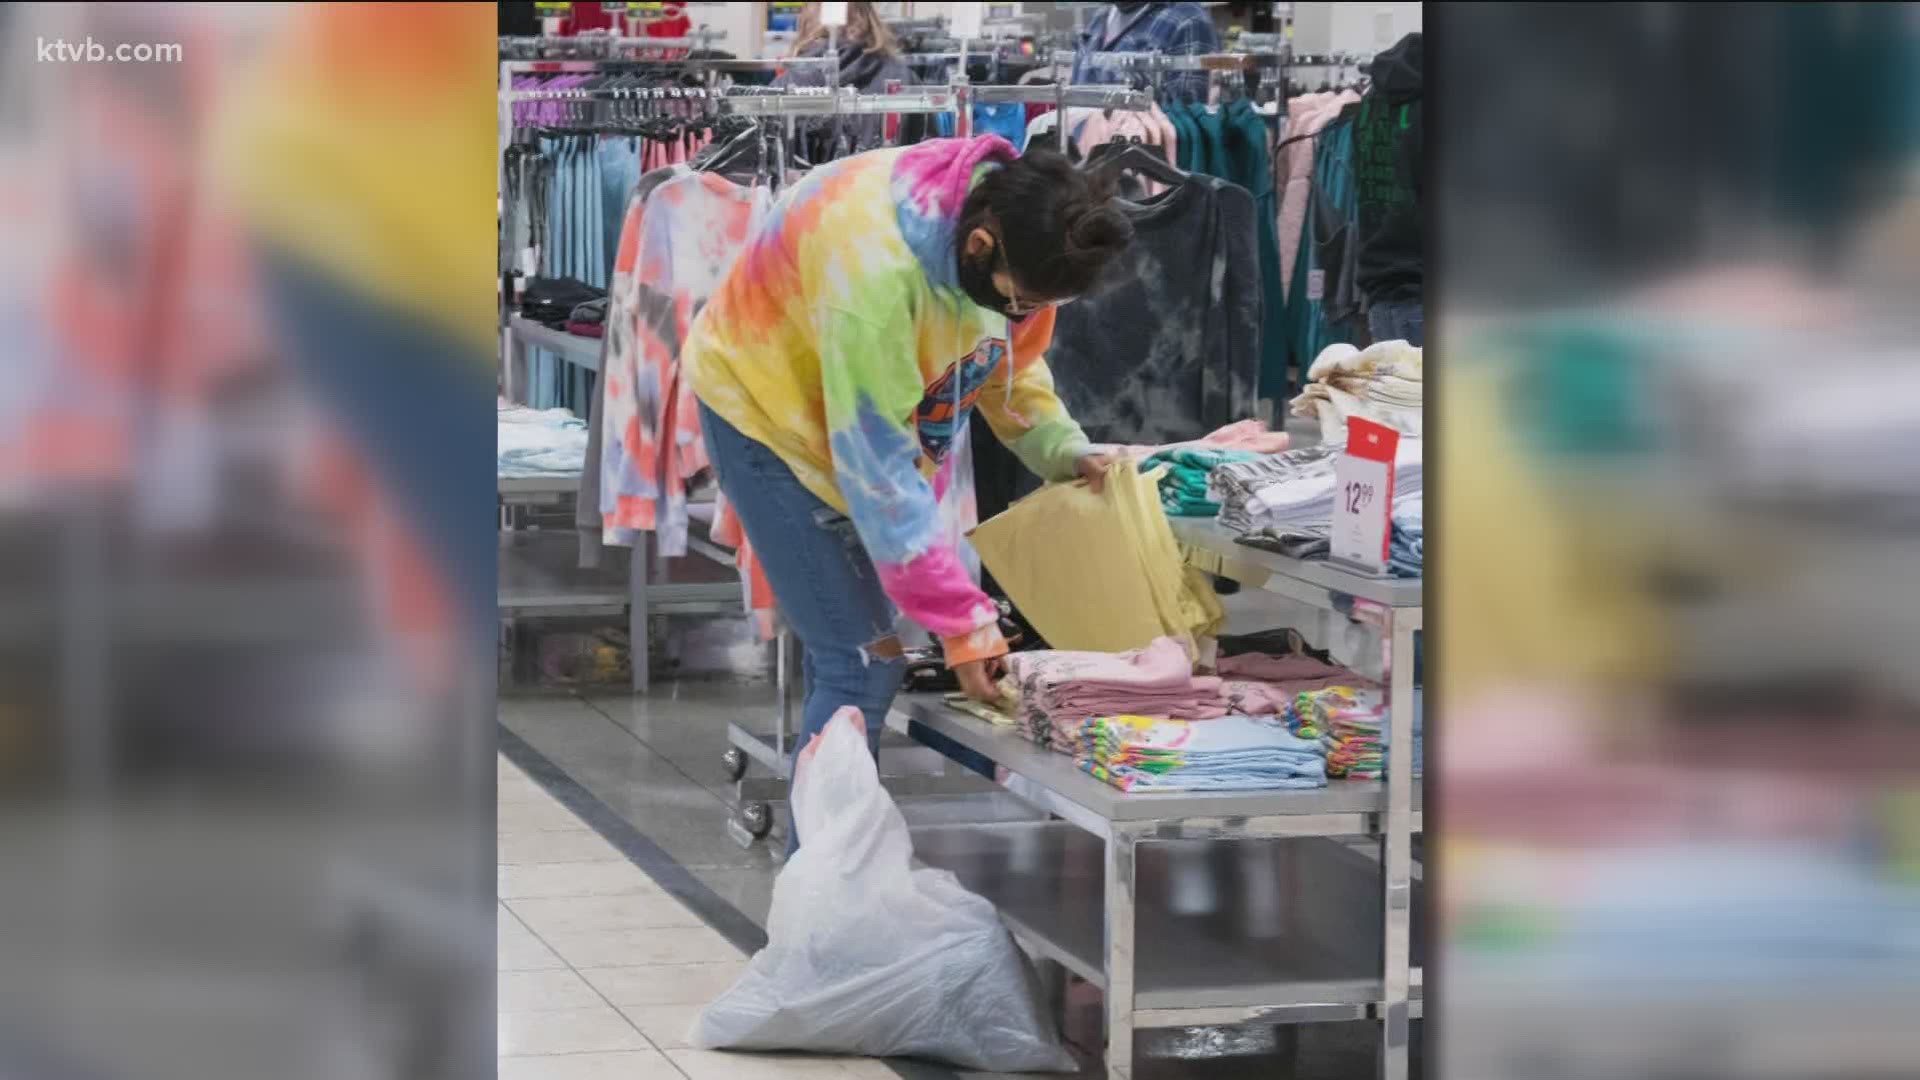 The Assistance League of Boise works with school districts to identify students in need of clothing. More than $140,000 was spent on clothing this year.